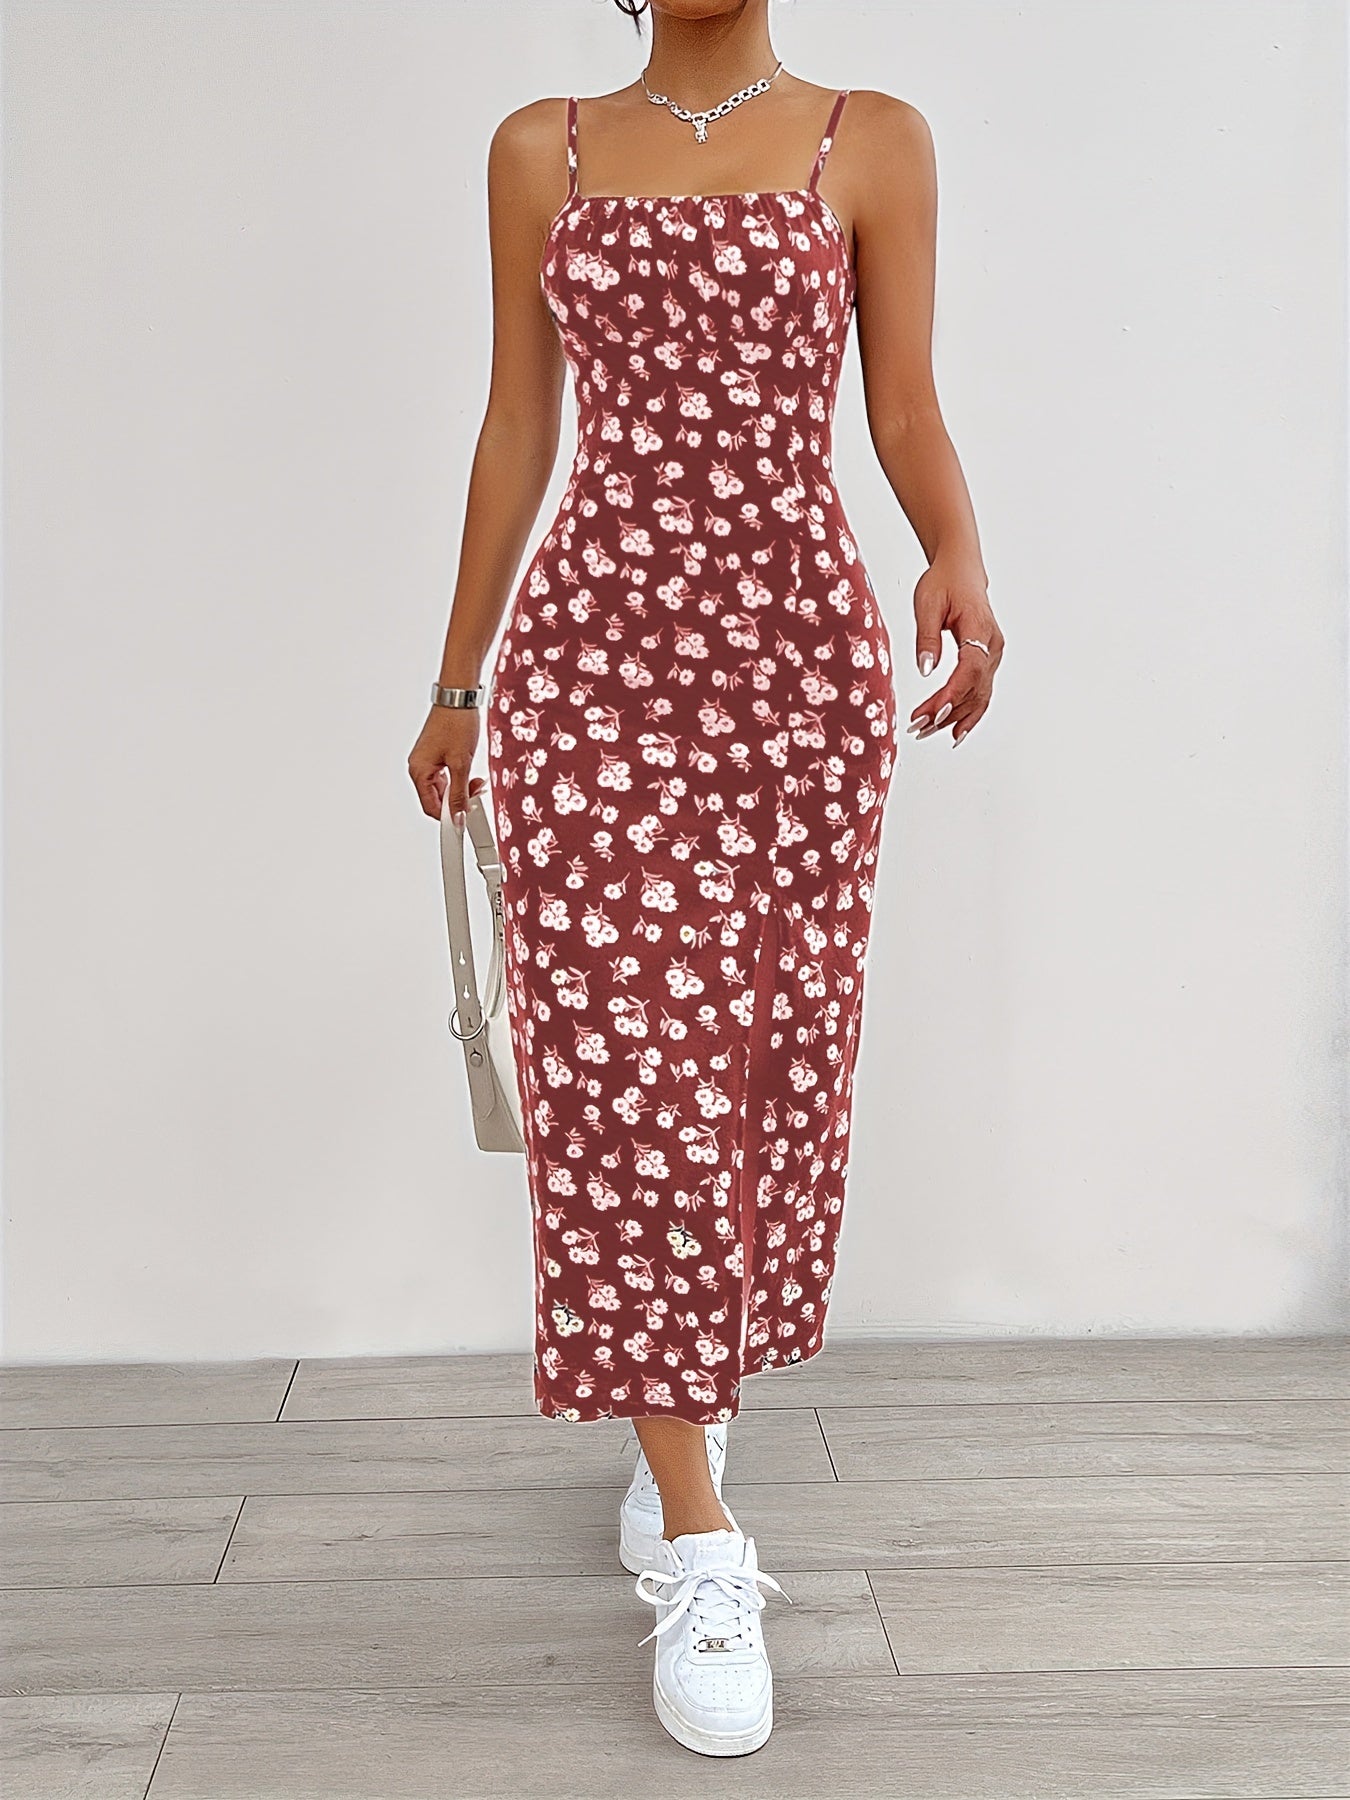 Flirty Floral Print Cami Dress with Flowy Split Hem - Chic Sleeveless Spaghetti Strap Design for Spring & Summer - A Fashionable Must-Have for Womens Wardrobe